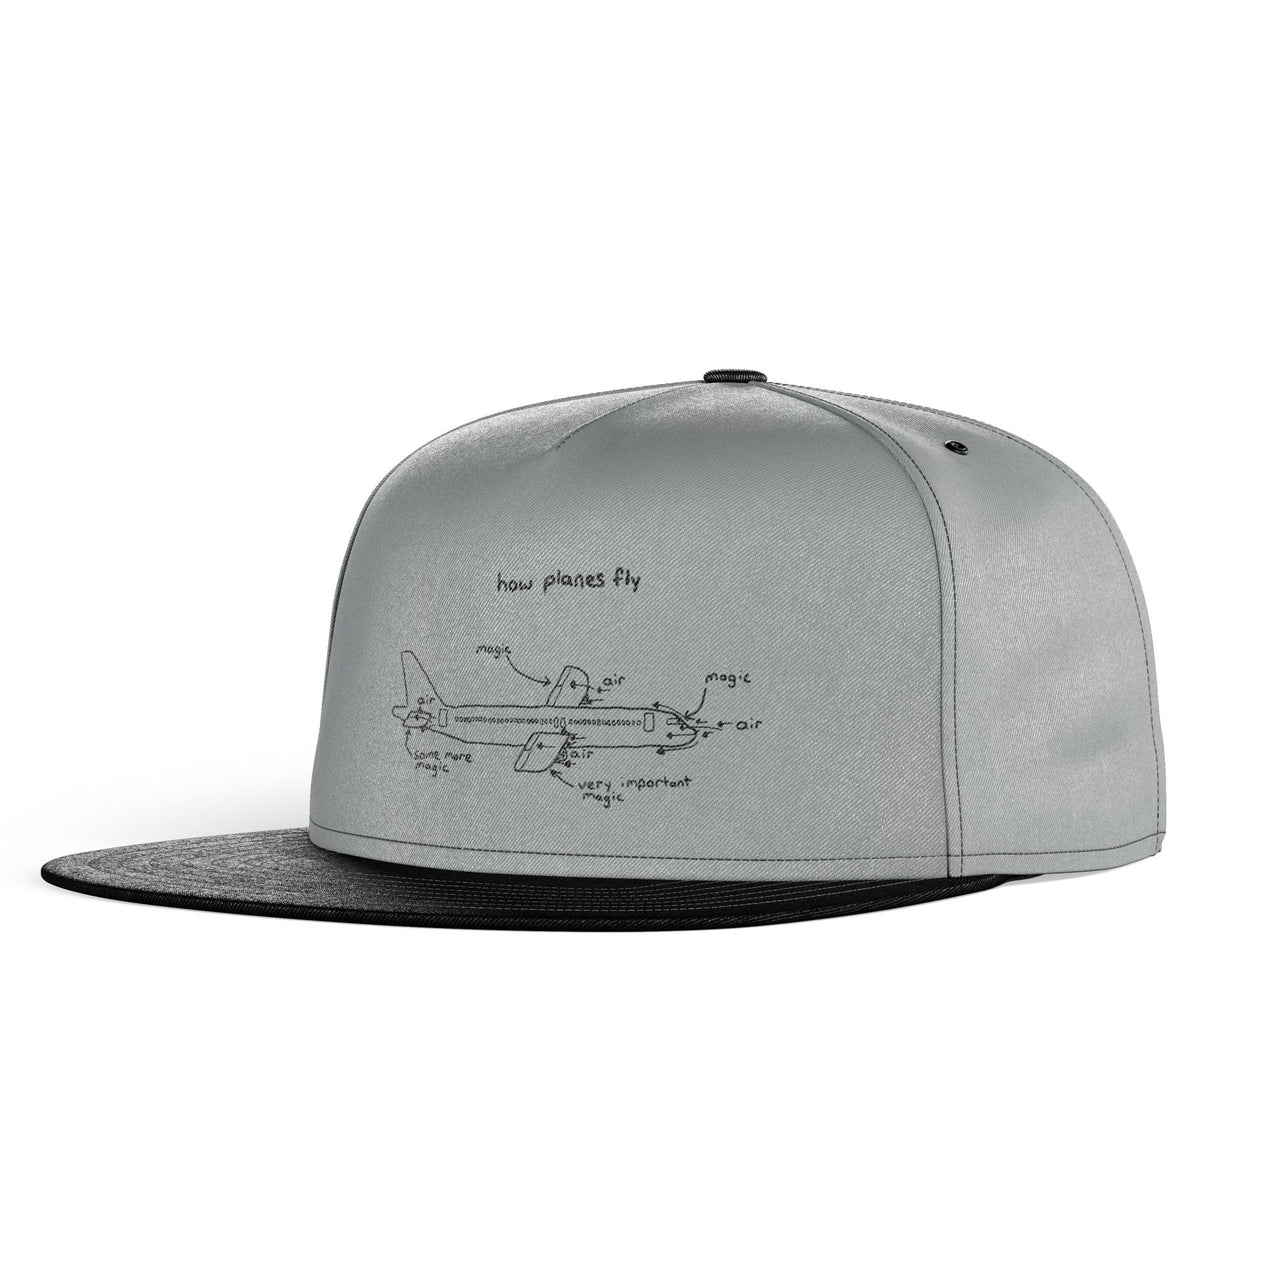 How Planes Fly Designed Snapback Caps & Hats